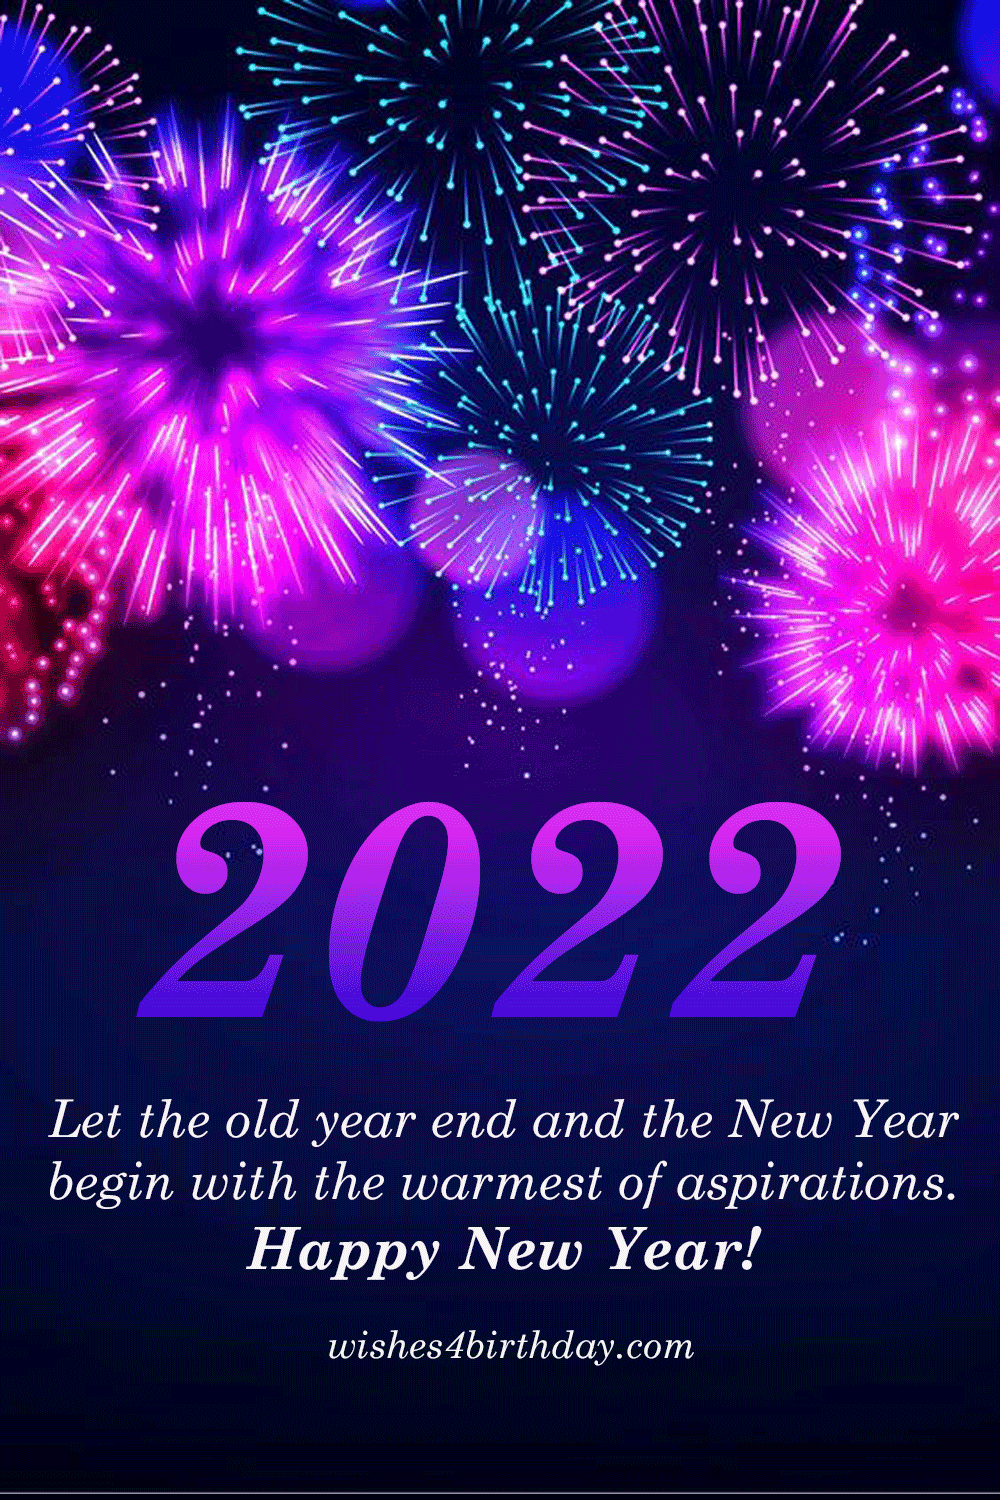 Happy New Year images with quotes - Happy Birthday Wishes, Memes, SMS &  Greeting eCard Images